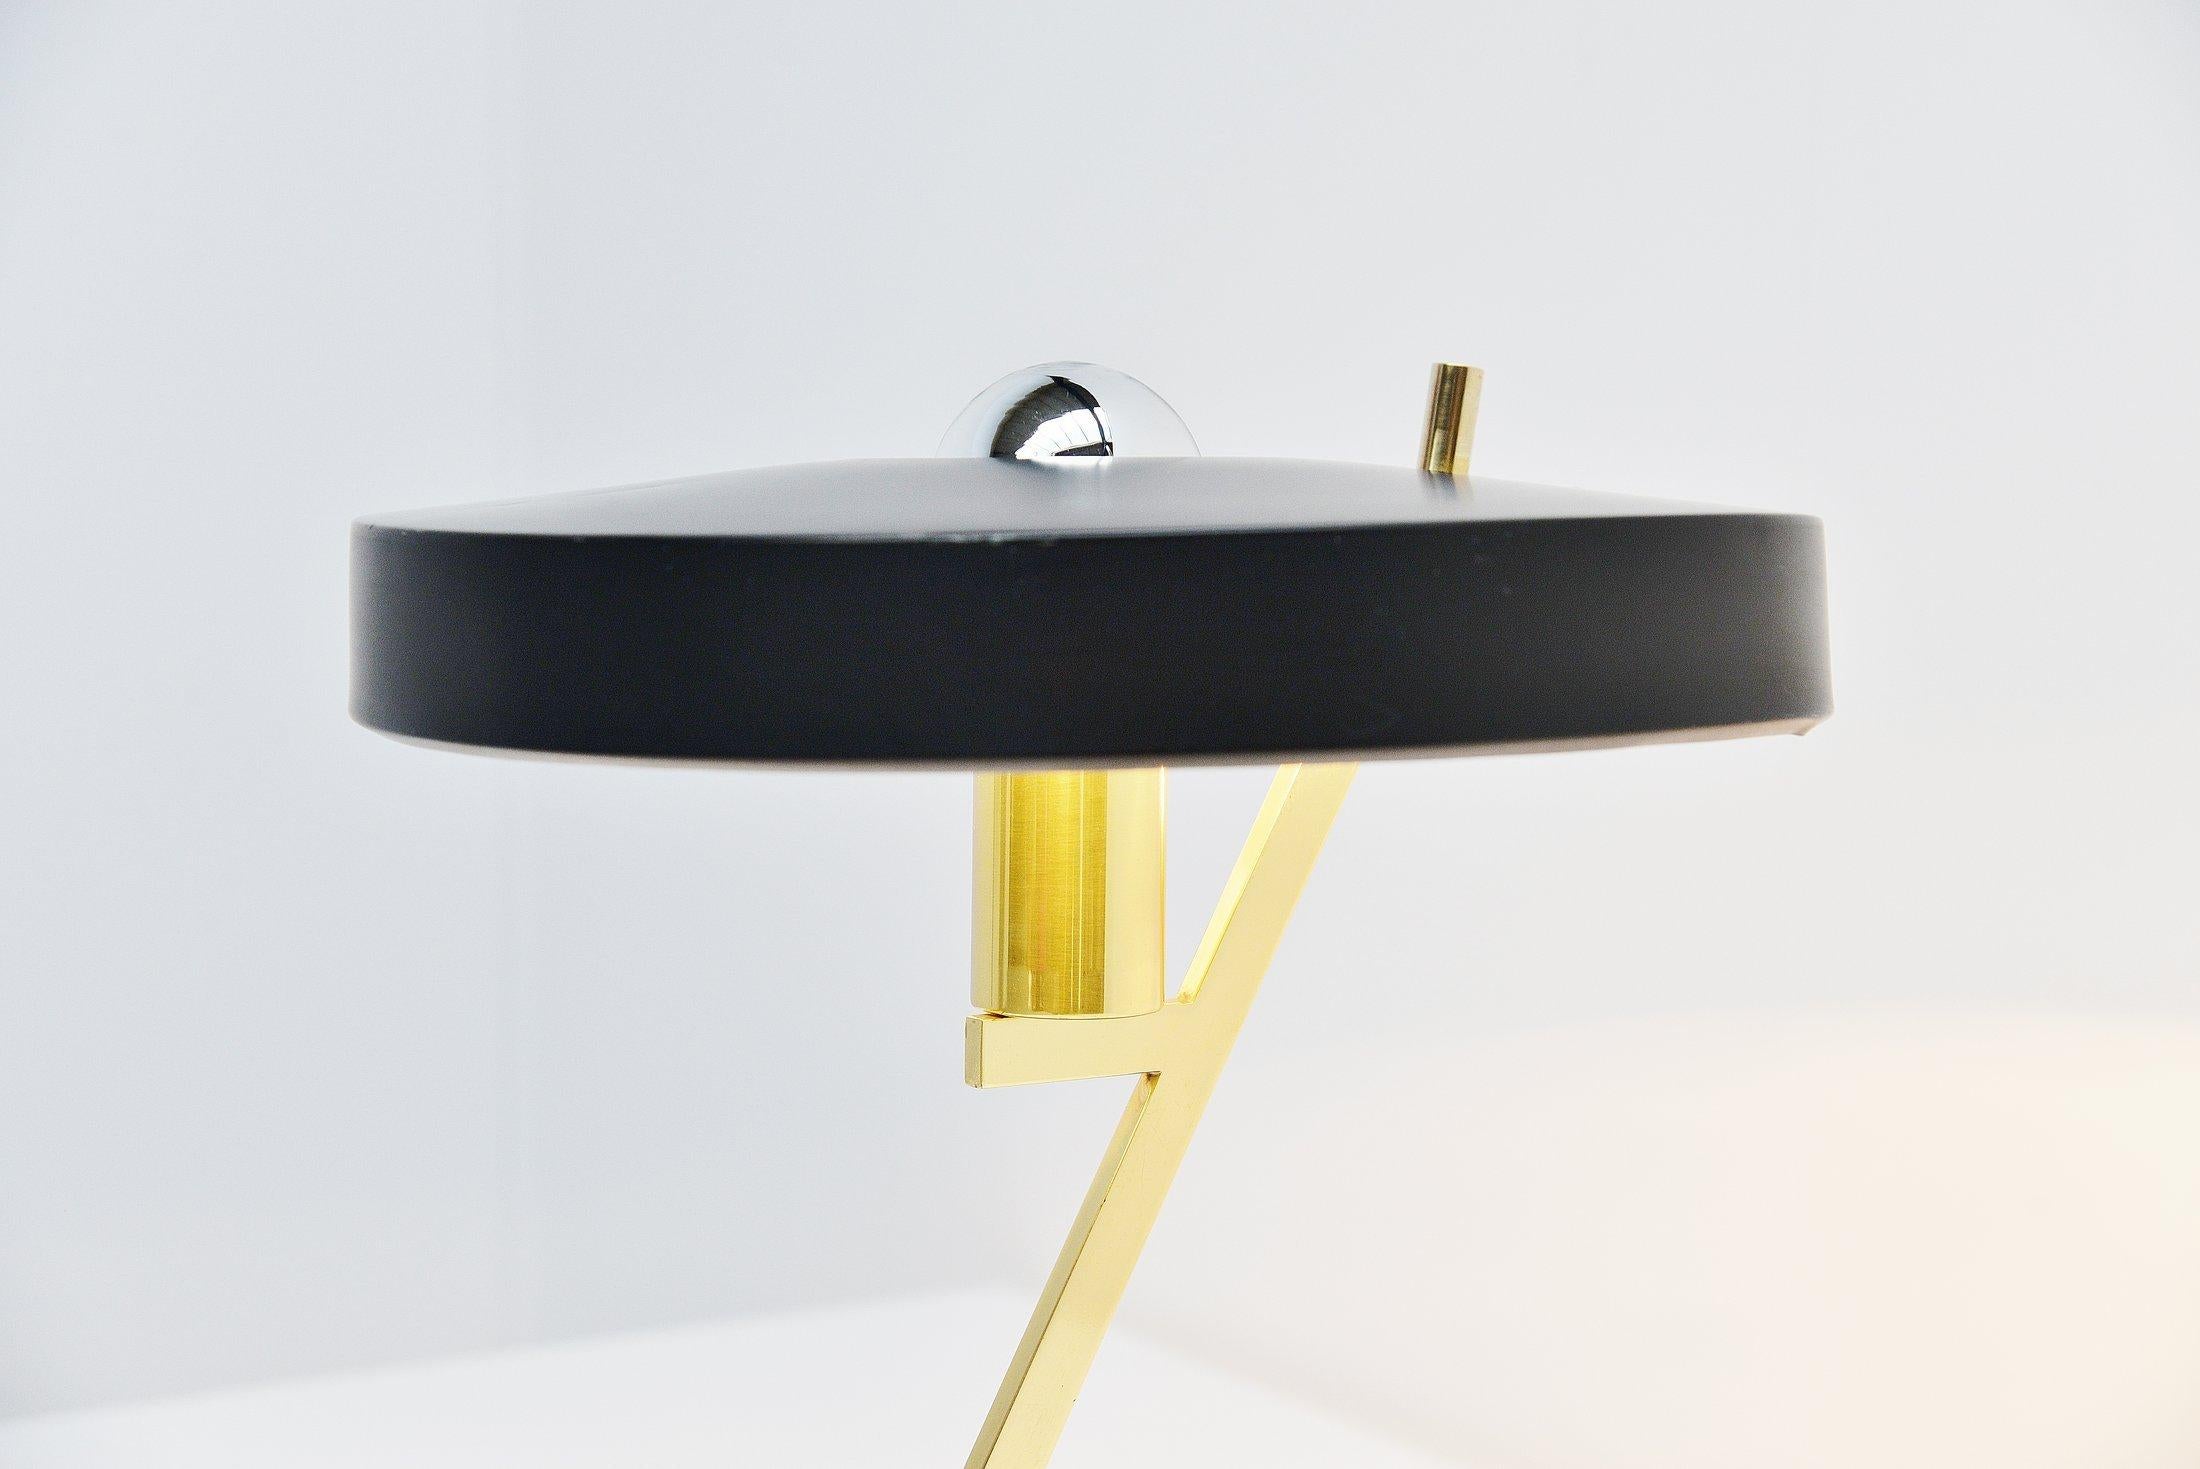 Very nice iconic table/desk lamp designed by Louis Christiaan Kalff and manufactured by Philips, Belgium 1955. This atomic desk lamp has a solid brass base with black lacquered weighted metal end. And it has a black lacquered cylindrical shade. The